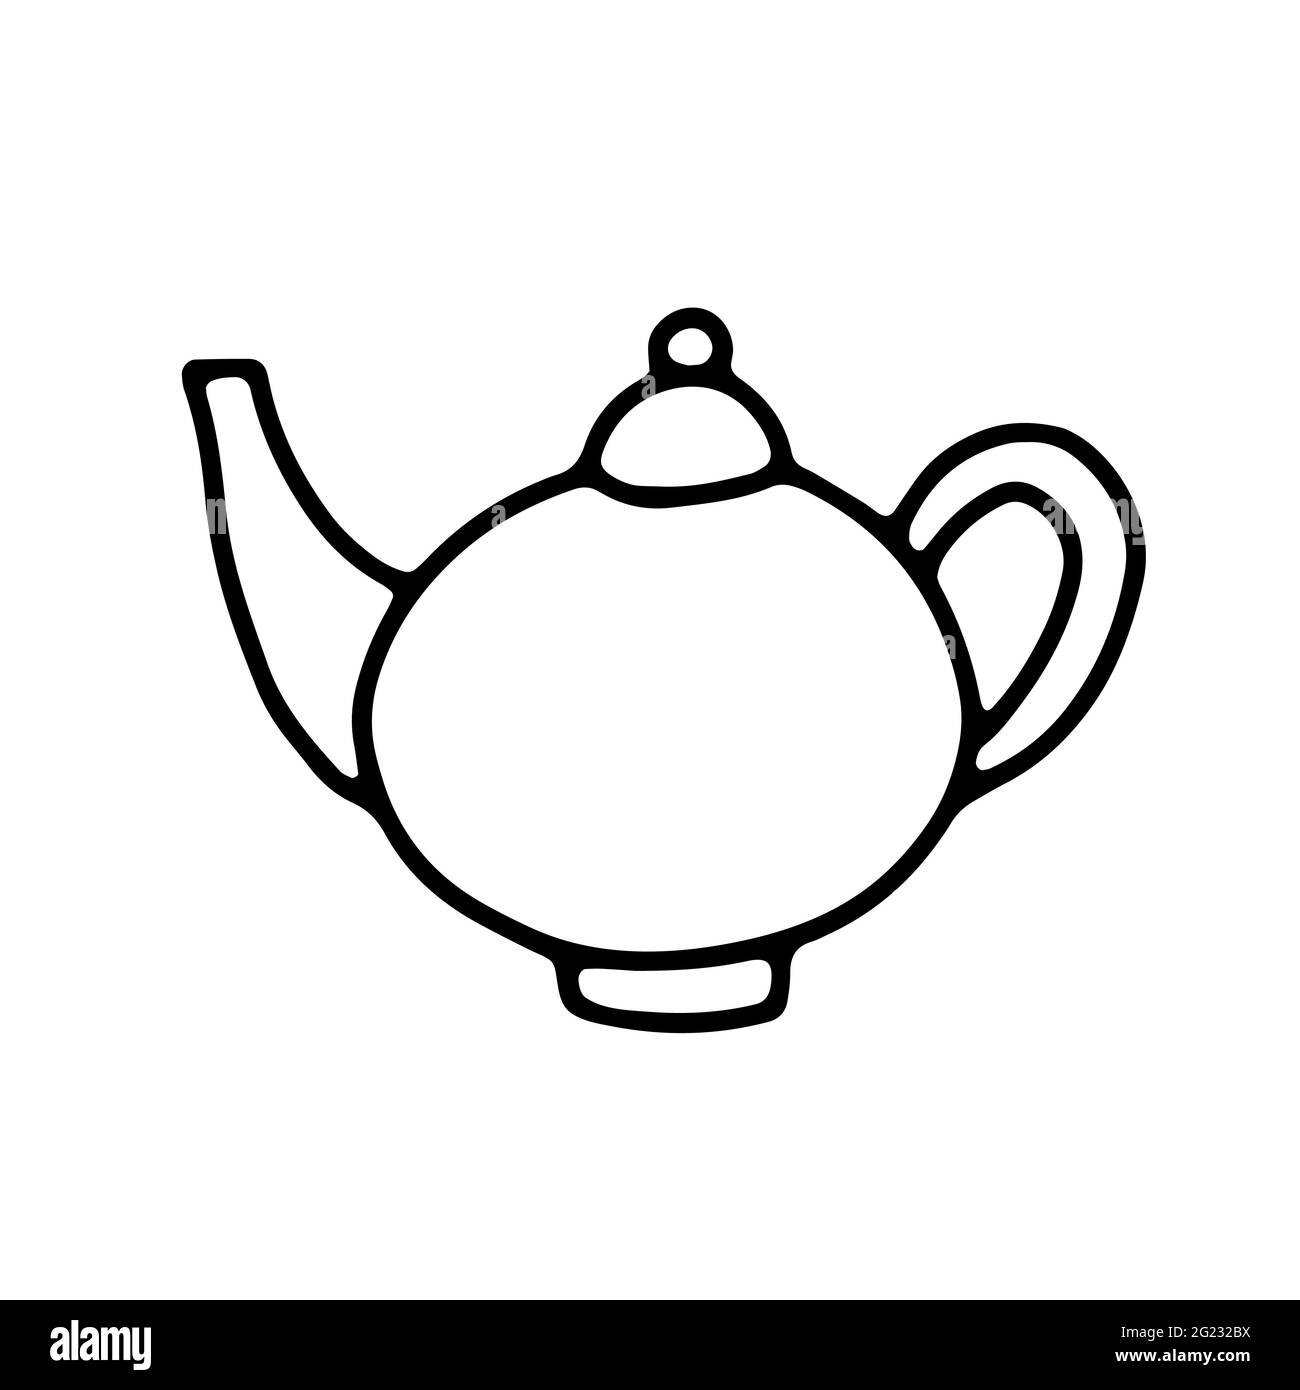 Doodle traditional hand drawn teapot. Outline Kettle isolated on white background. Cozy kitchen utensils, cute kitchenware, dishes for tea, coffee, dr Stock Vector